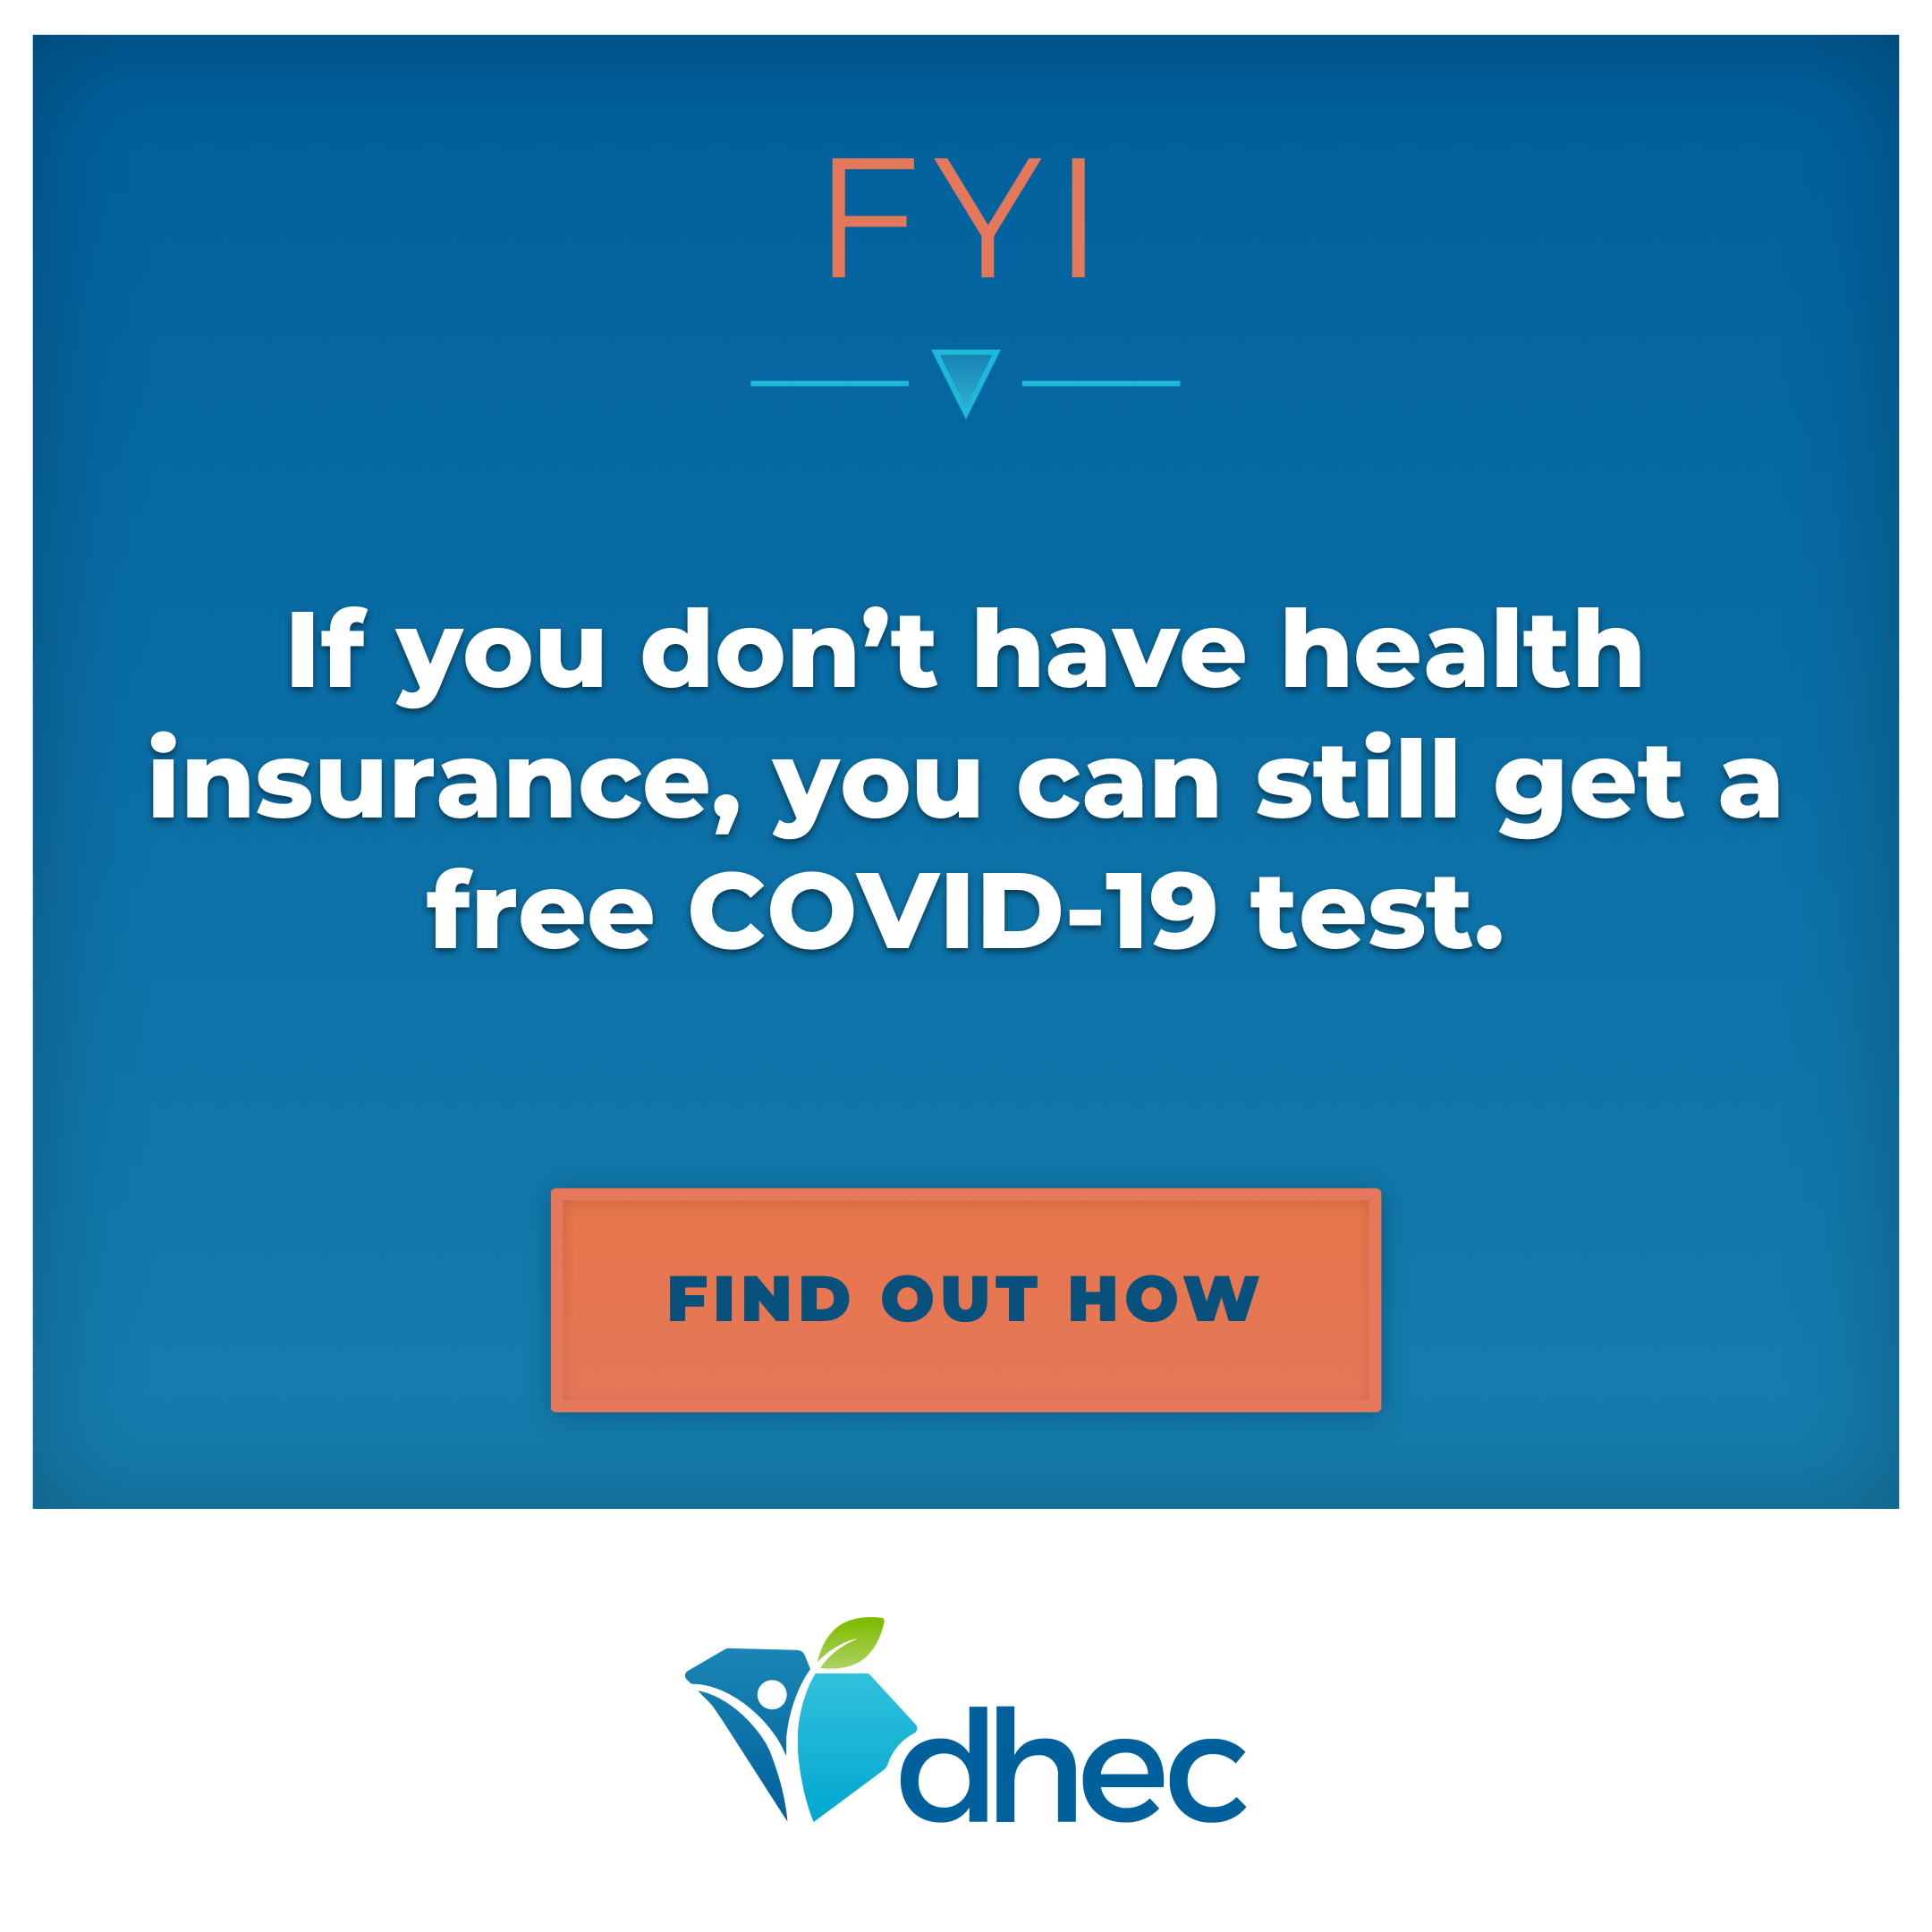 You can still get a test without health insurance